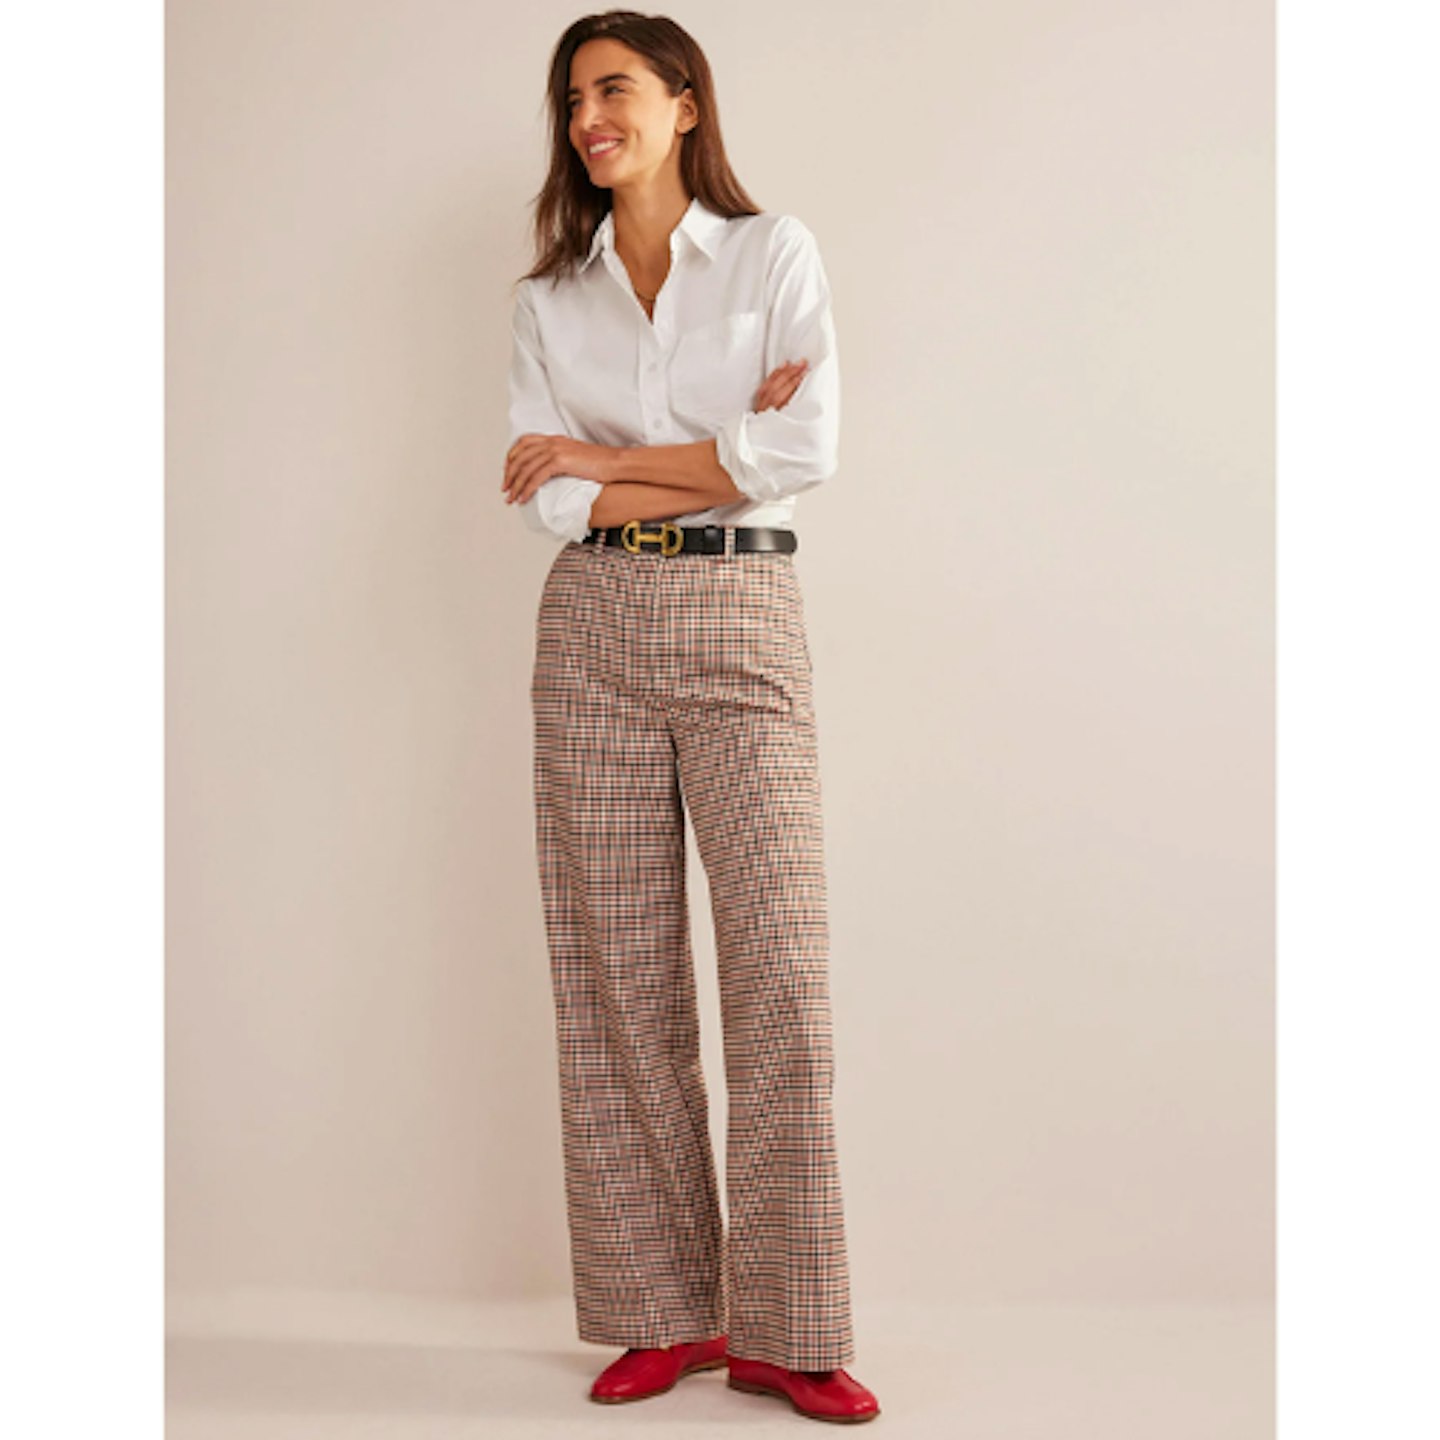 Claudia's Houndstooth Trousers Dupe